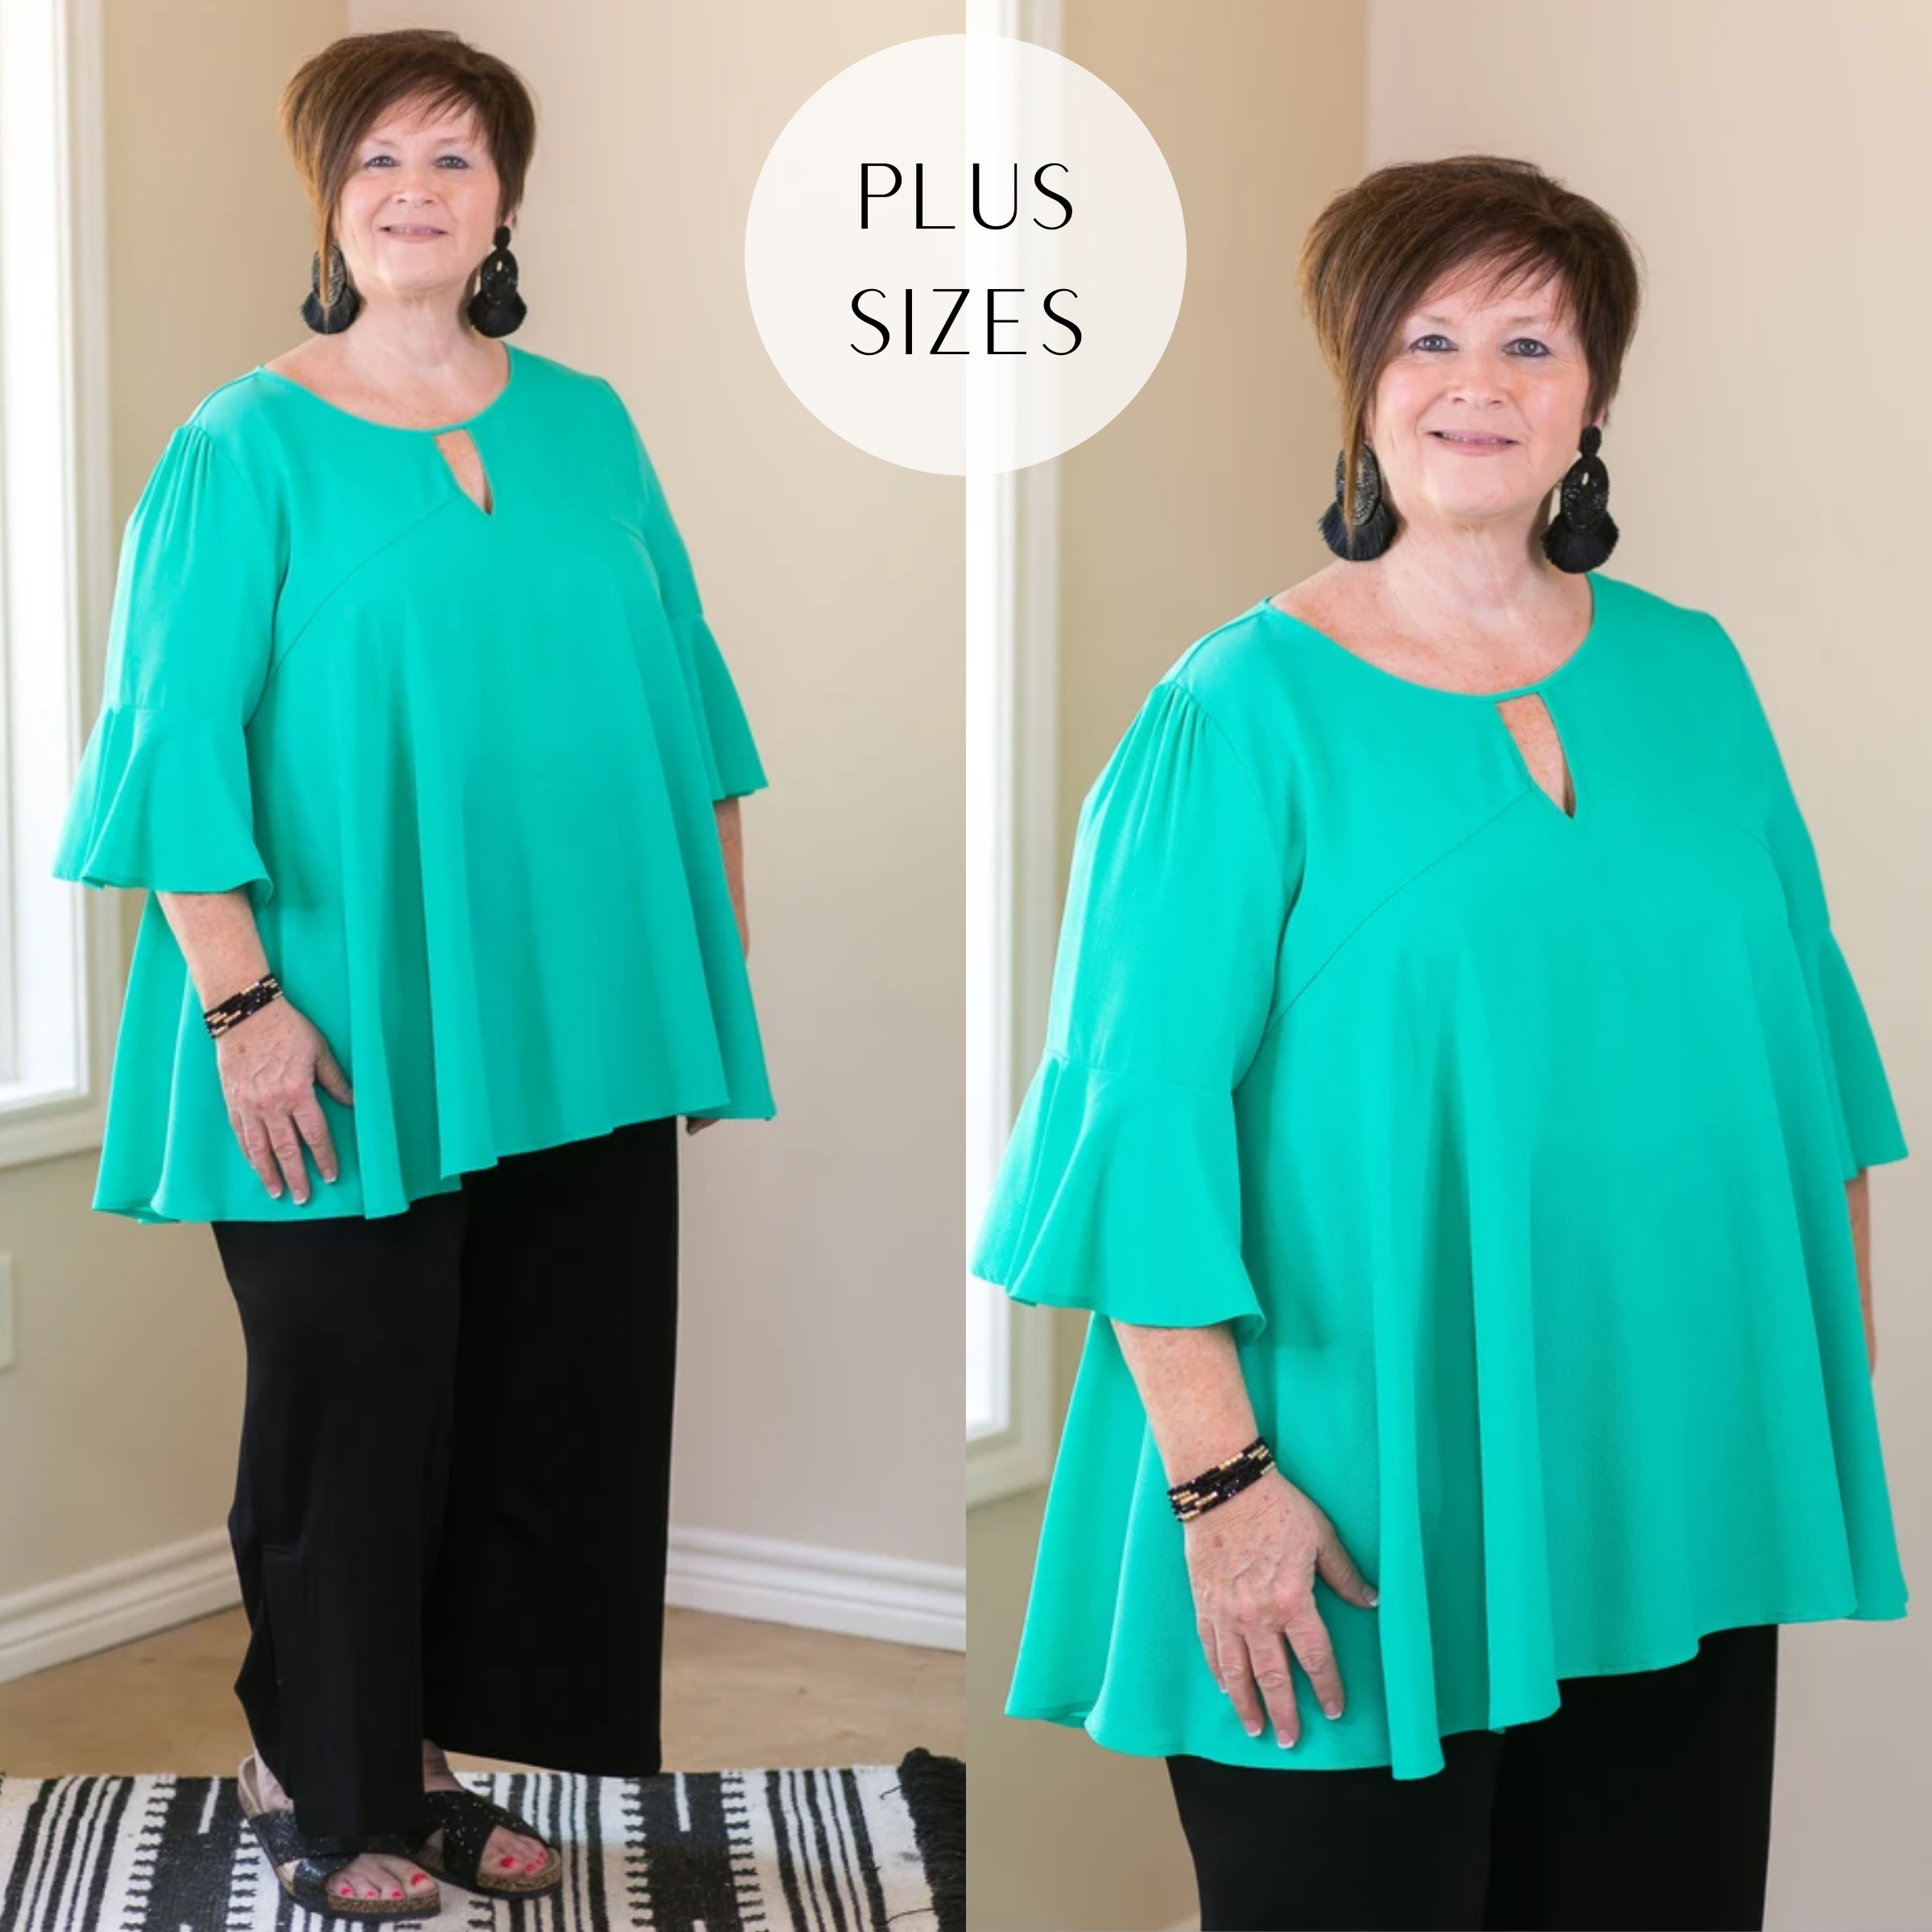 Last Chance Size XL & 1XL | Plus Size | Meet Me In The Middle Flare Sleeve Top with Keyhole in Seafoam Green - Giddy Up Glamour Boutique